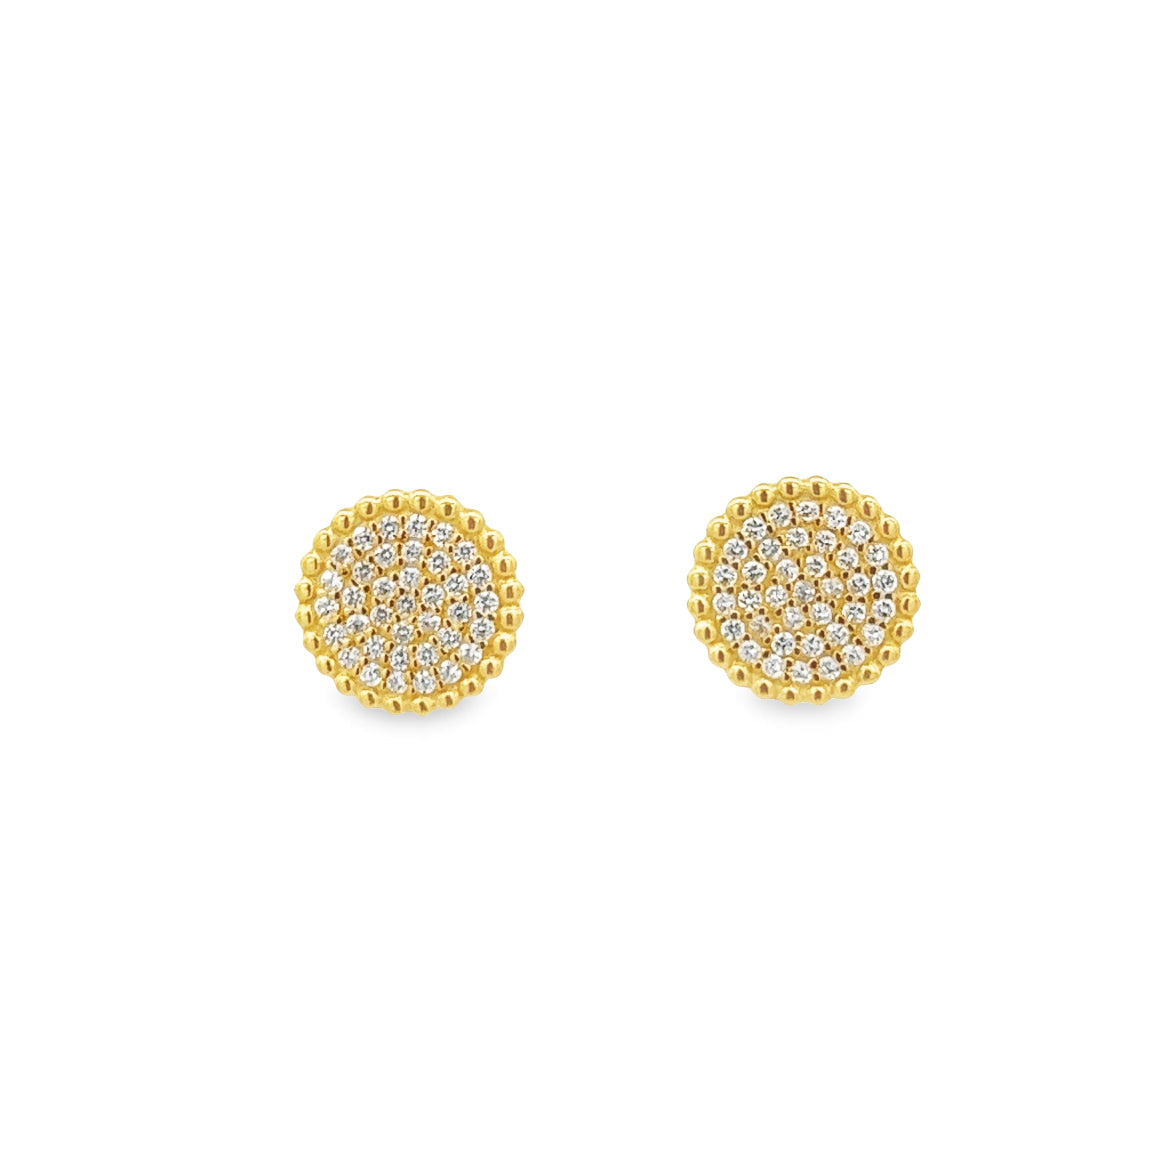 925 SILVER GOLD PLATED PAVE STUDS